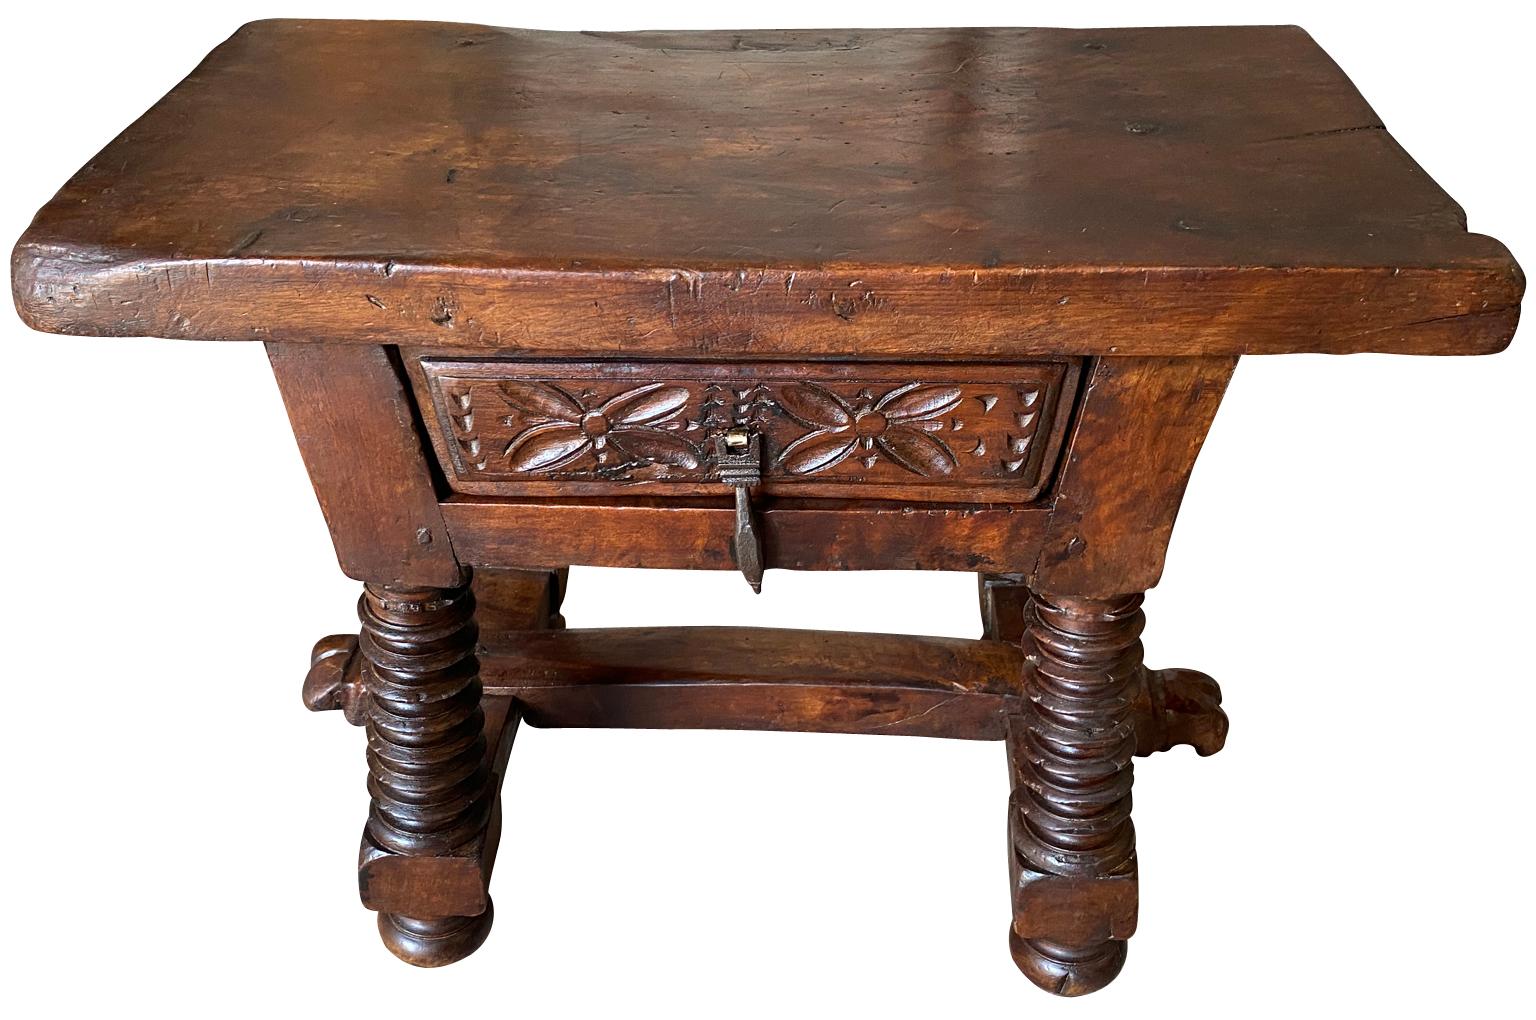 A very handsome early 19th century Arte Populaire side table from Northern Italy. Soundly constructed in beautiful walnut with a solid board top, a single drawer and turned legs. Stunning patina, warm and luminous.